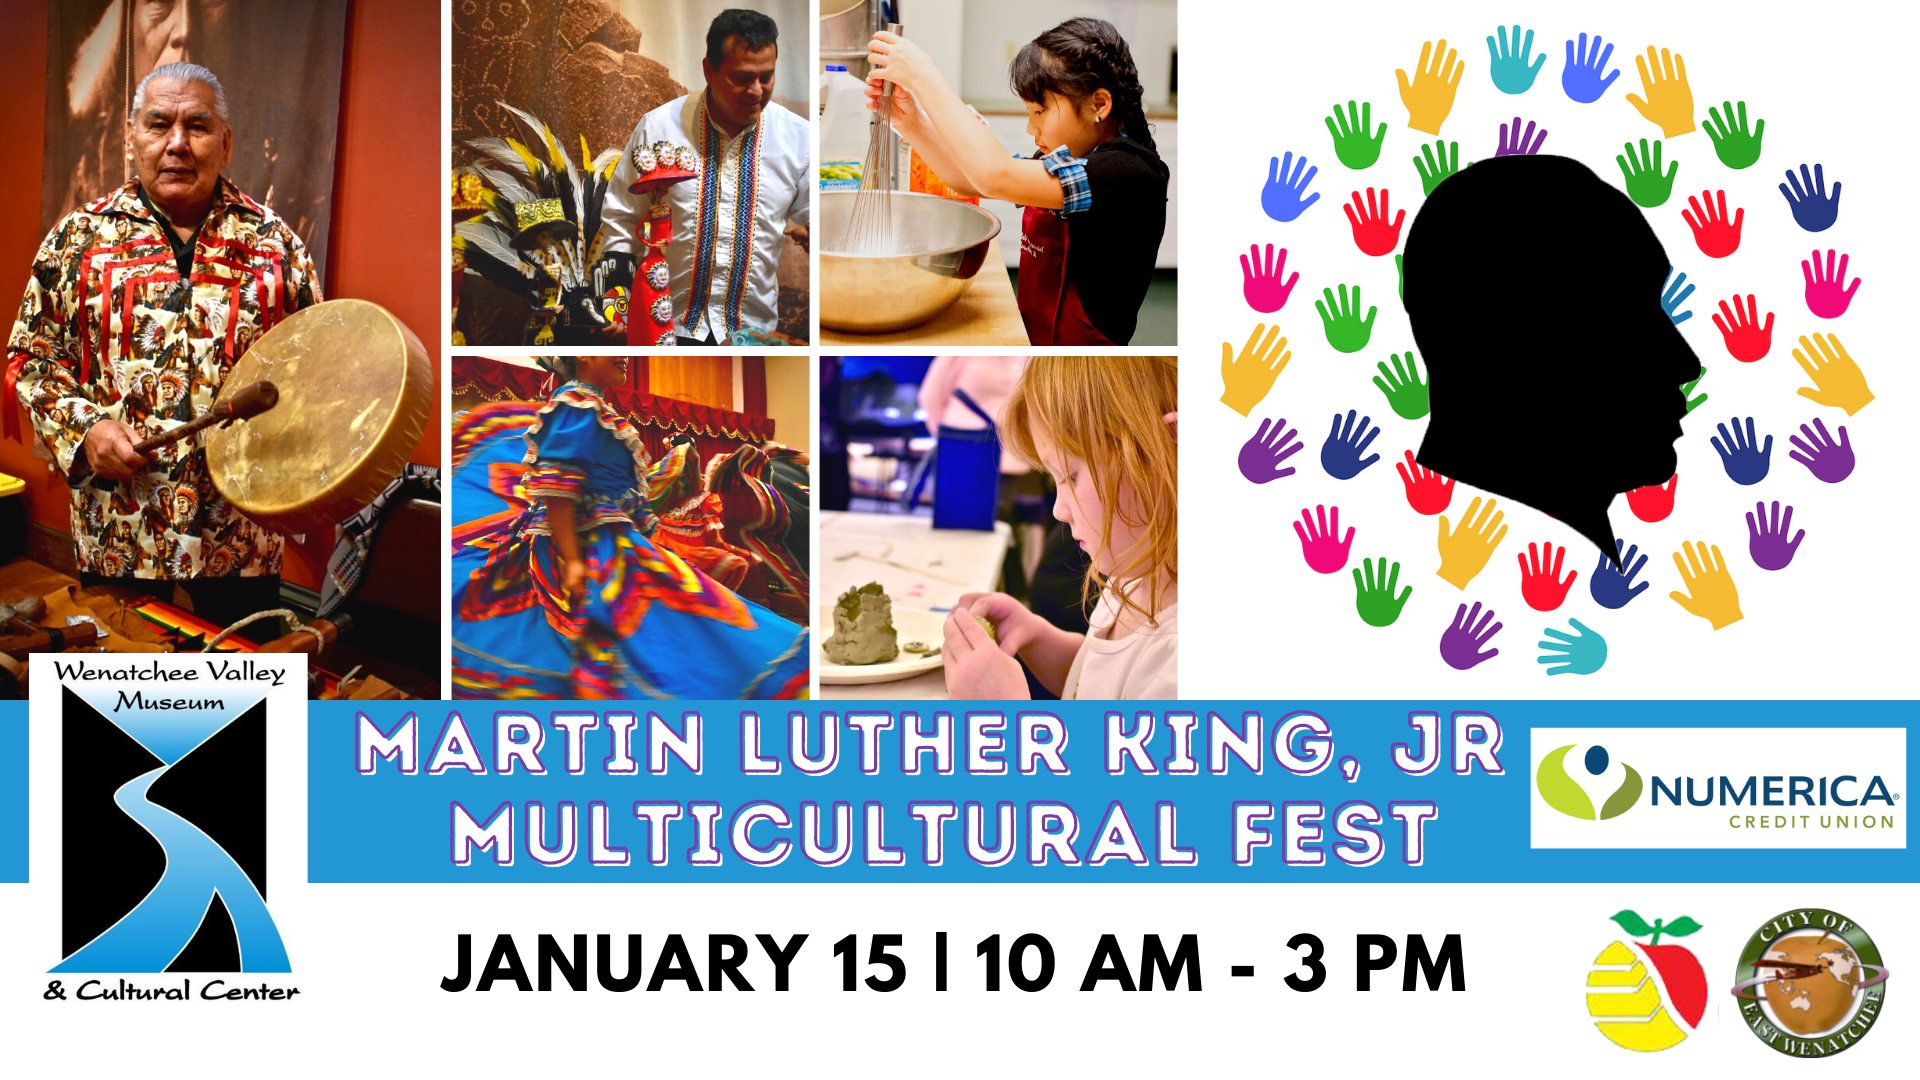 <h1 class="tribe-events-single-event-title">Martin Luther King Jr. Multicultural Fest</h1>